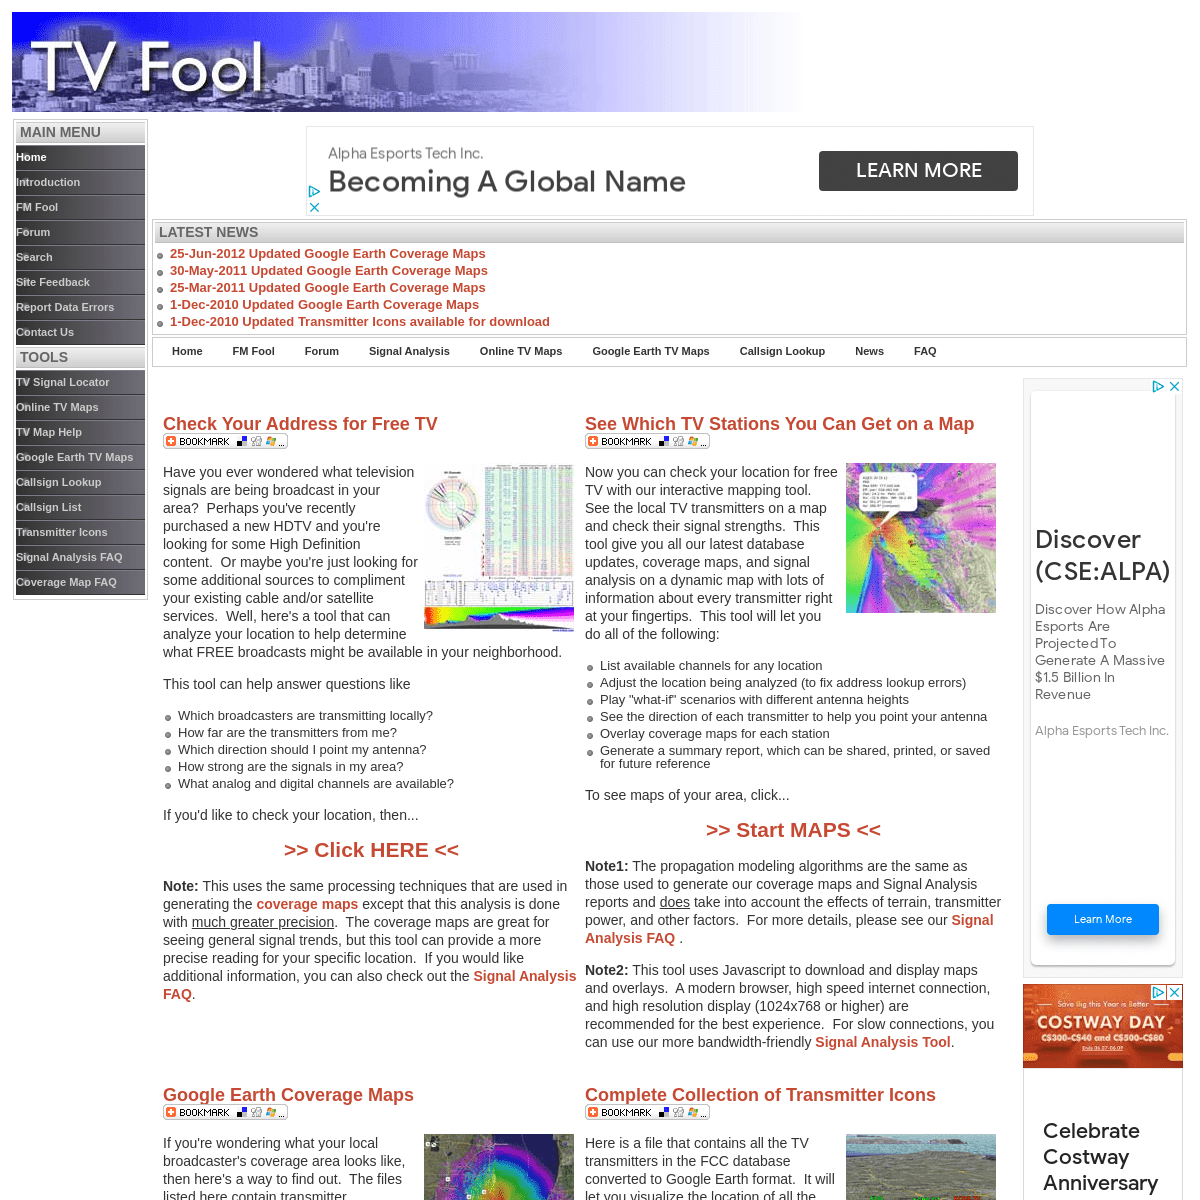 A complete backup of https://tvfool.com